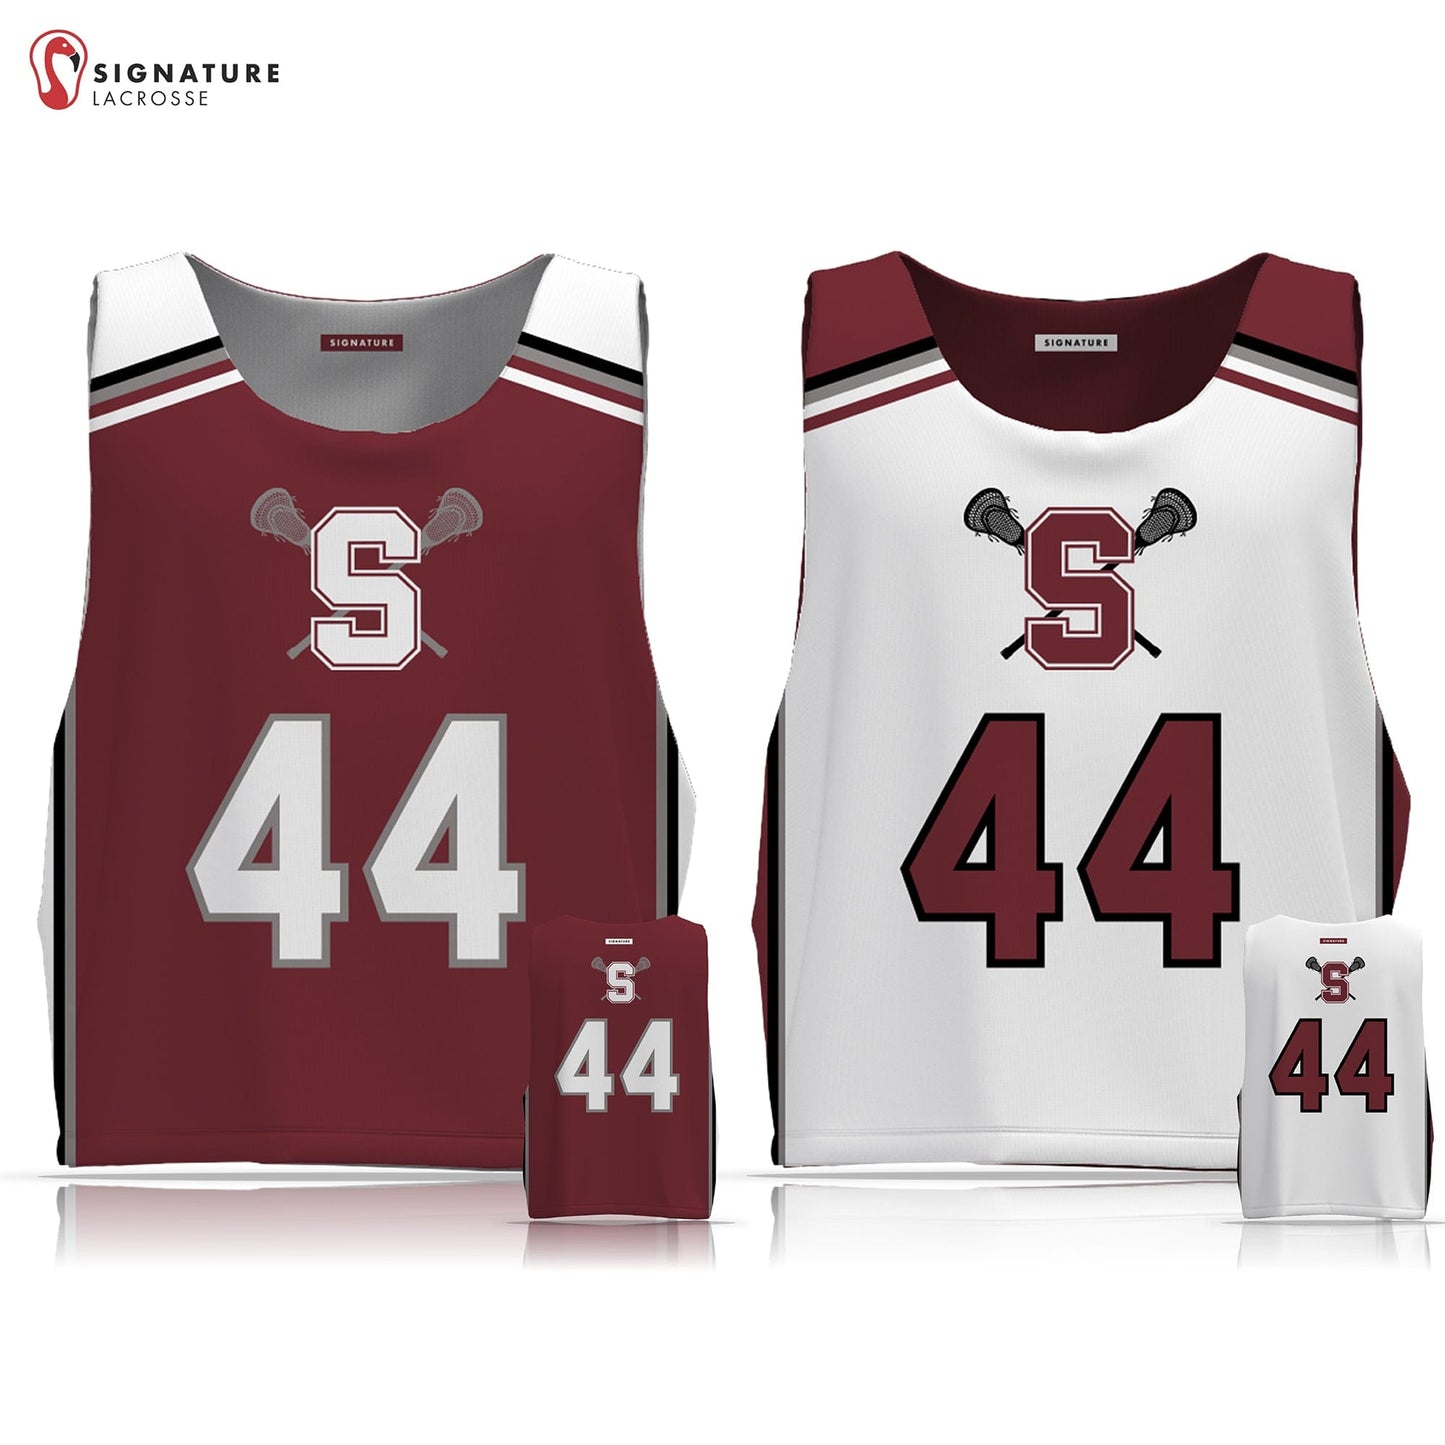 State College Men's Player Reversible Game Pinnie: 5-6 Signature Lacrosse